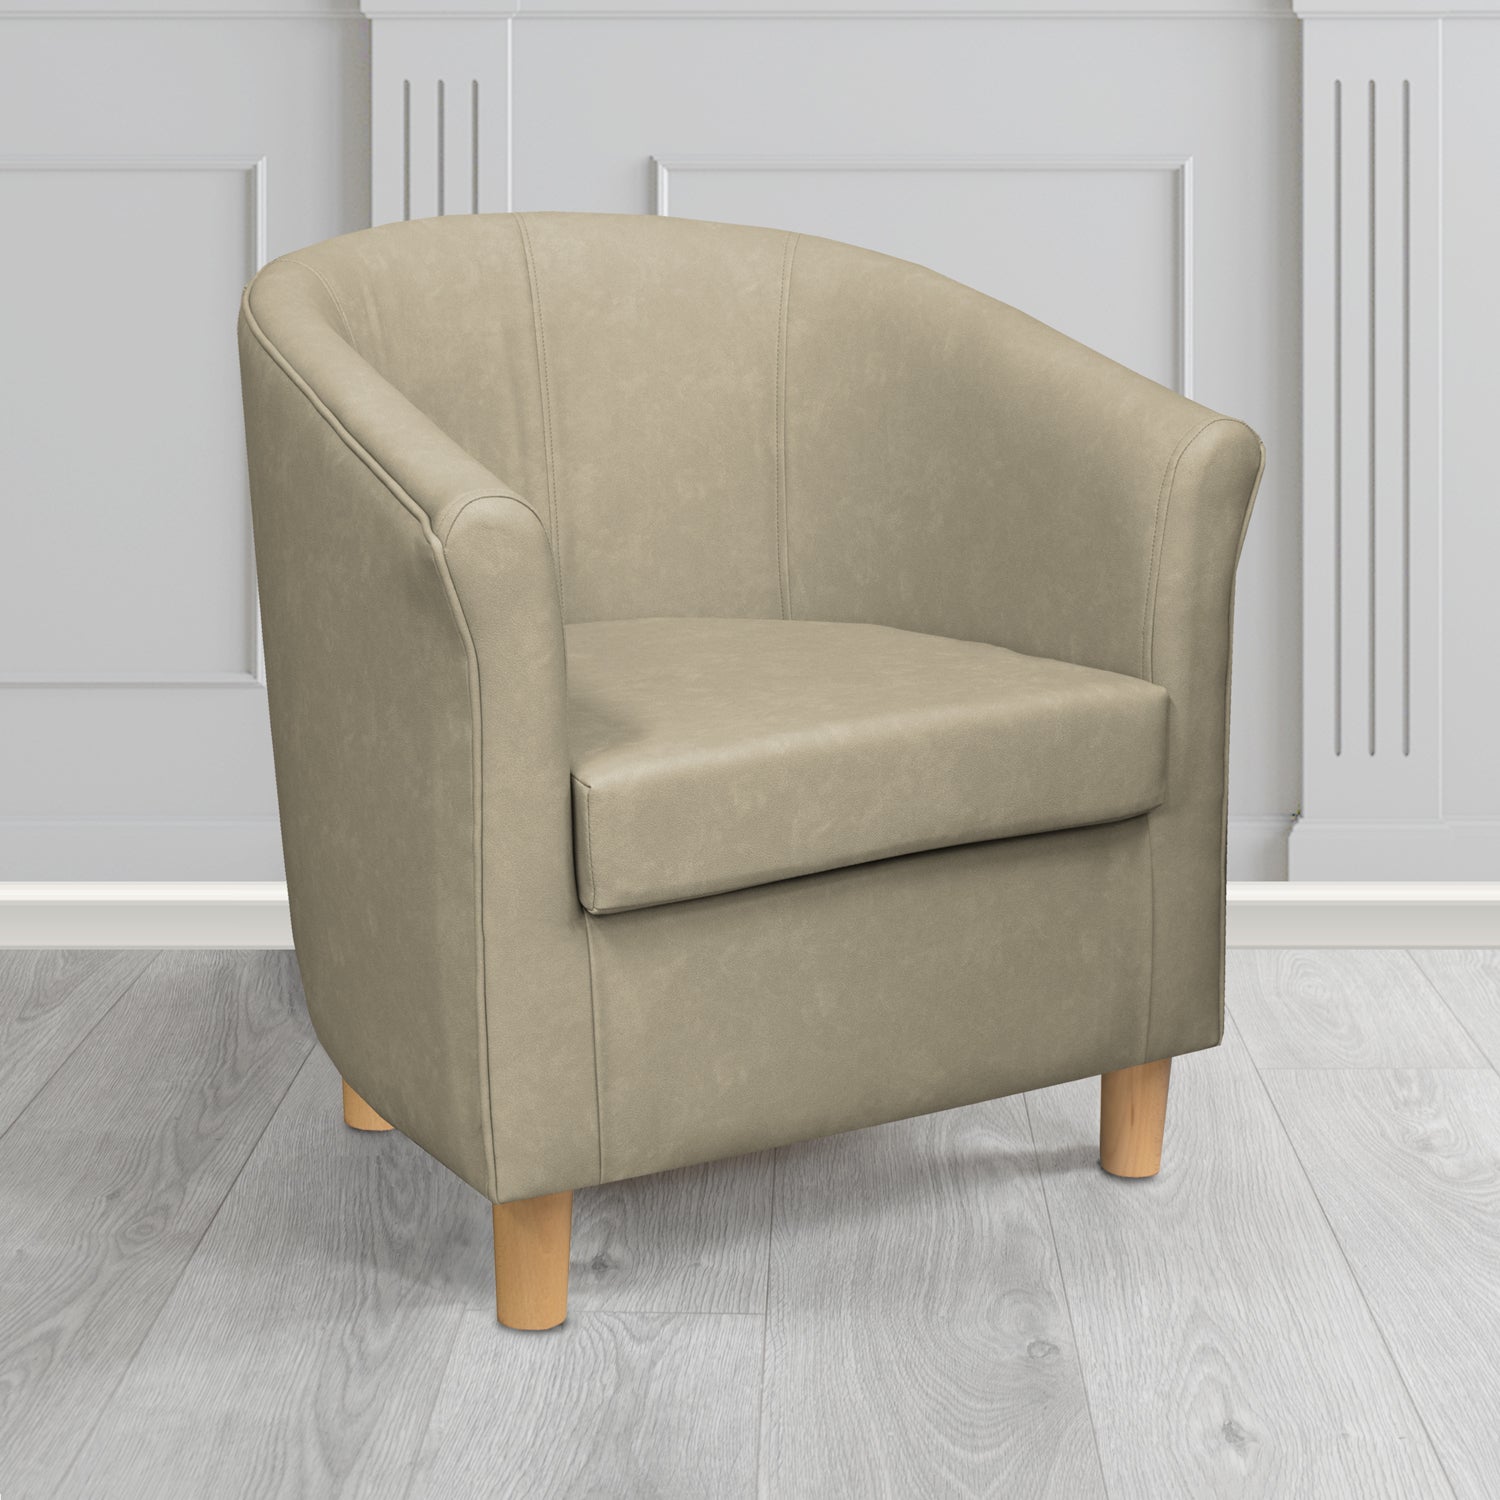 Tuscany Tub Chair in Infiniti Granite INF1845 Antimicrobial Crib 5 Faux Leather - The Tub Chair Shop